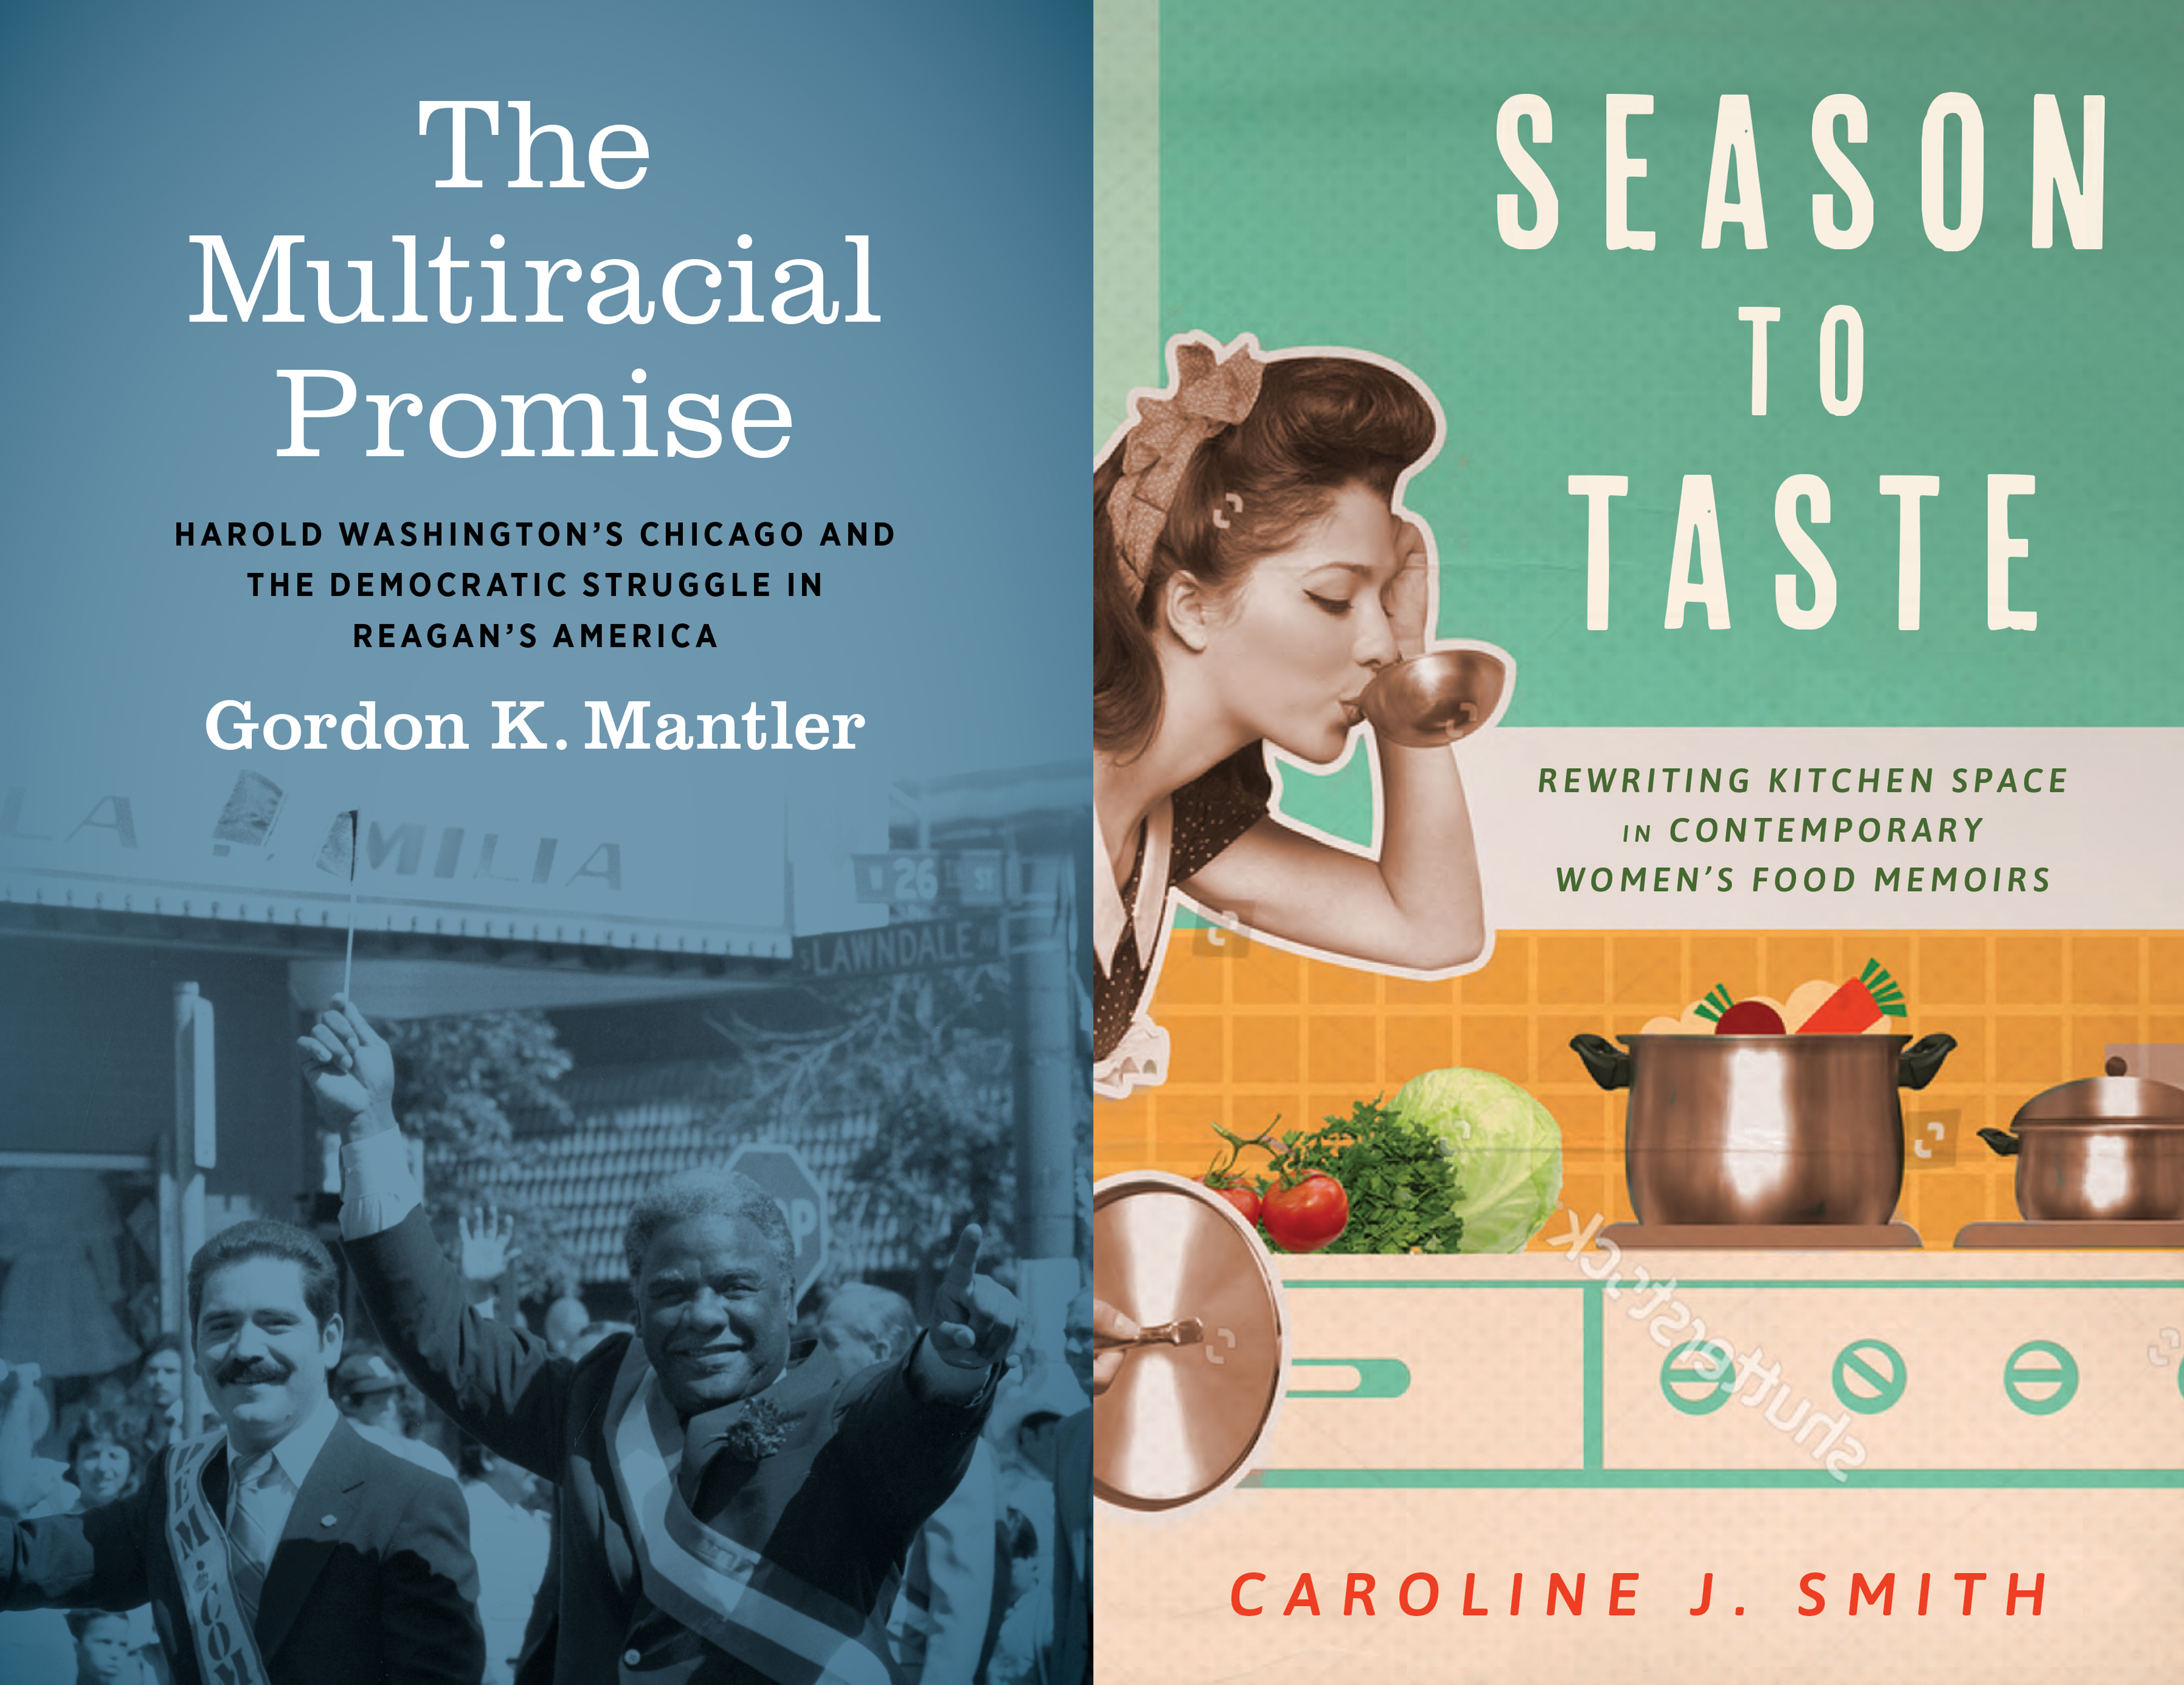 Book cover of Gordon Mantler's The Multiracial Promise on the left-it is blue and shows people during a March with Harold Washington centered and the cover of Caroline Smith's  Season to Taste on the right which shows a green and yellow kitchen space with large pots and vegetables and a woman on the left side in sepia tones drinking from a tasting spoon.